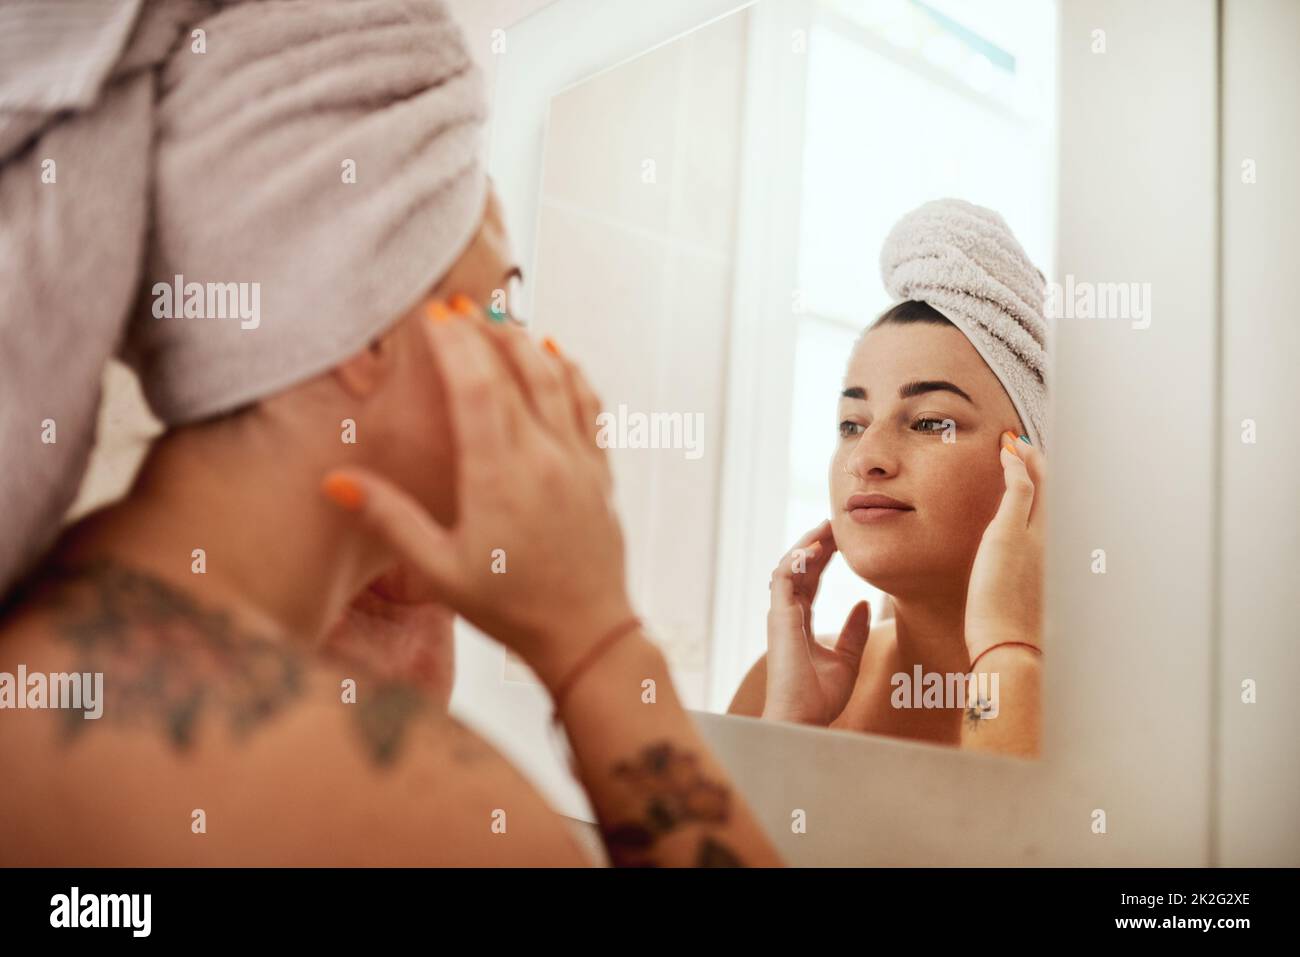 What you do is a reflection of you. Shot of an attractive young woman inspecting her face in the bathroom mirror. Stock Photo